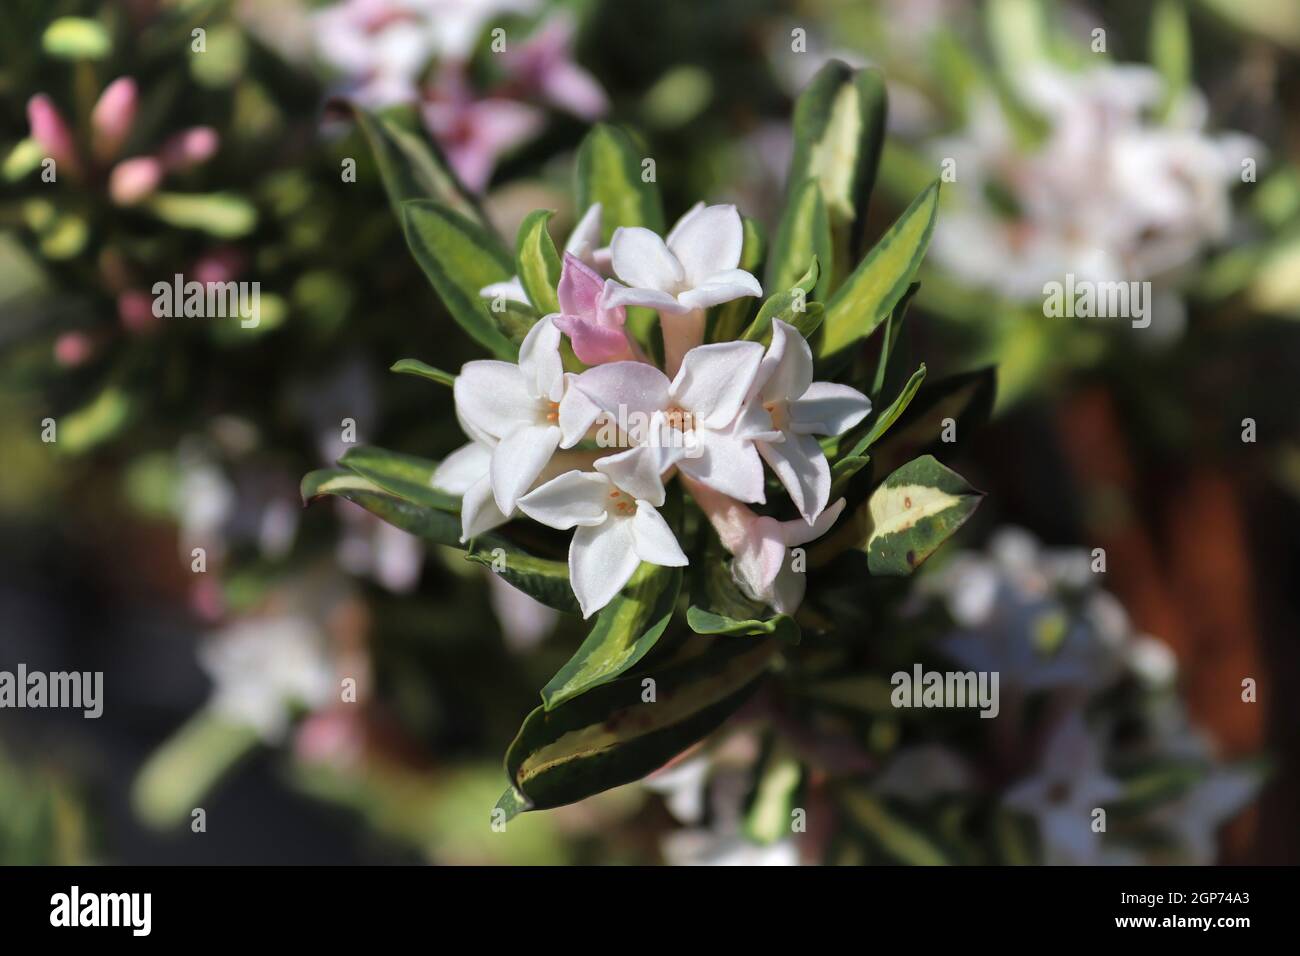 Clusters of daphne burkwoodii flower in full bloom. Stock Photo